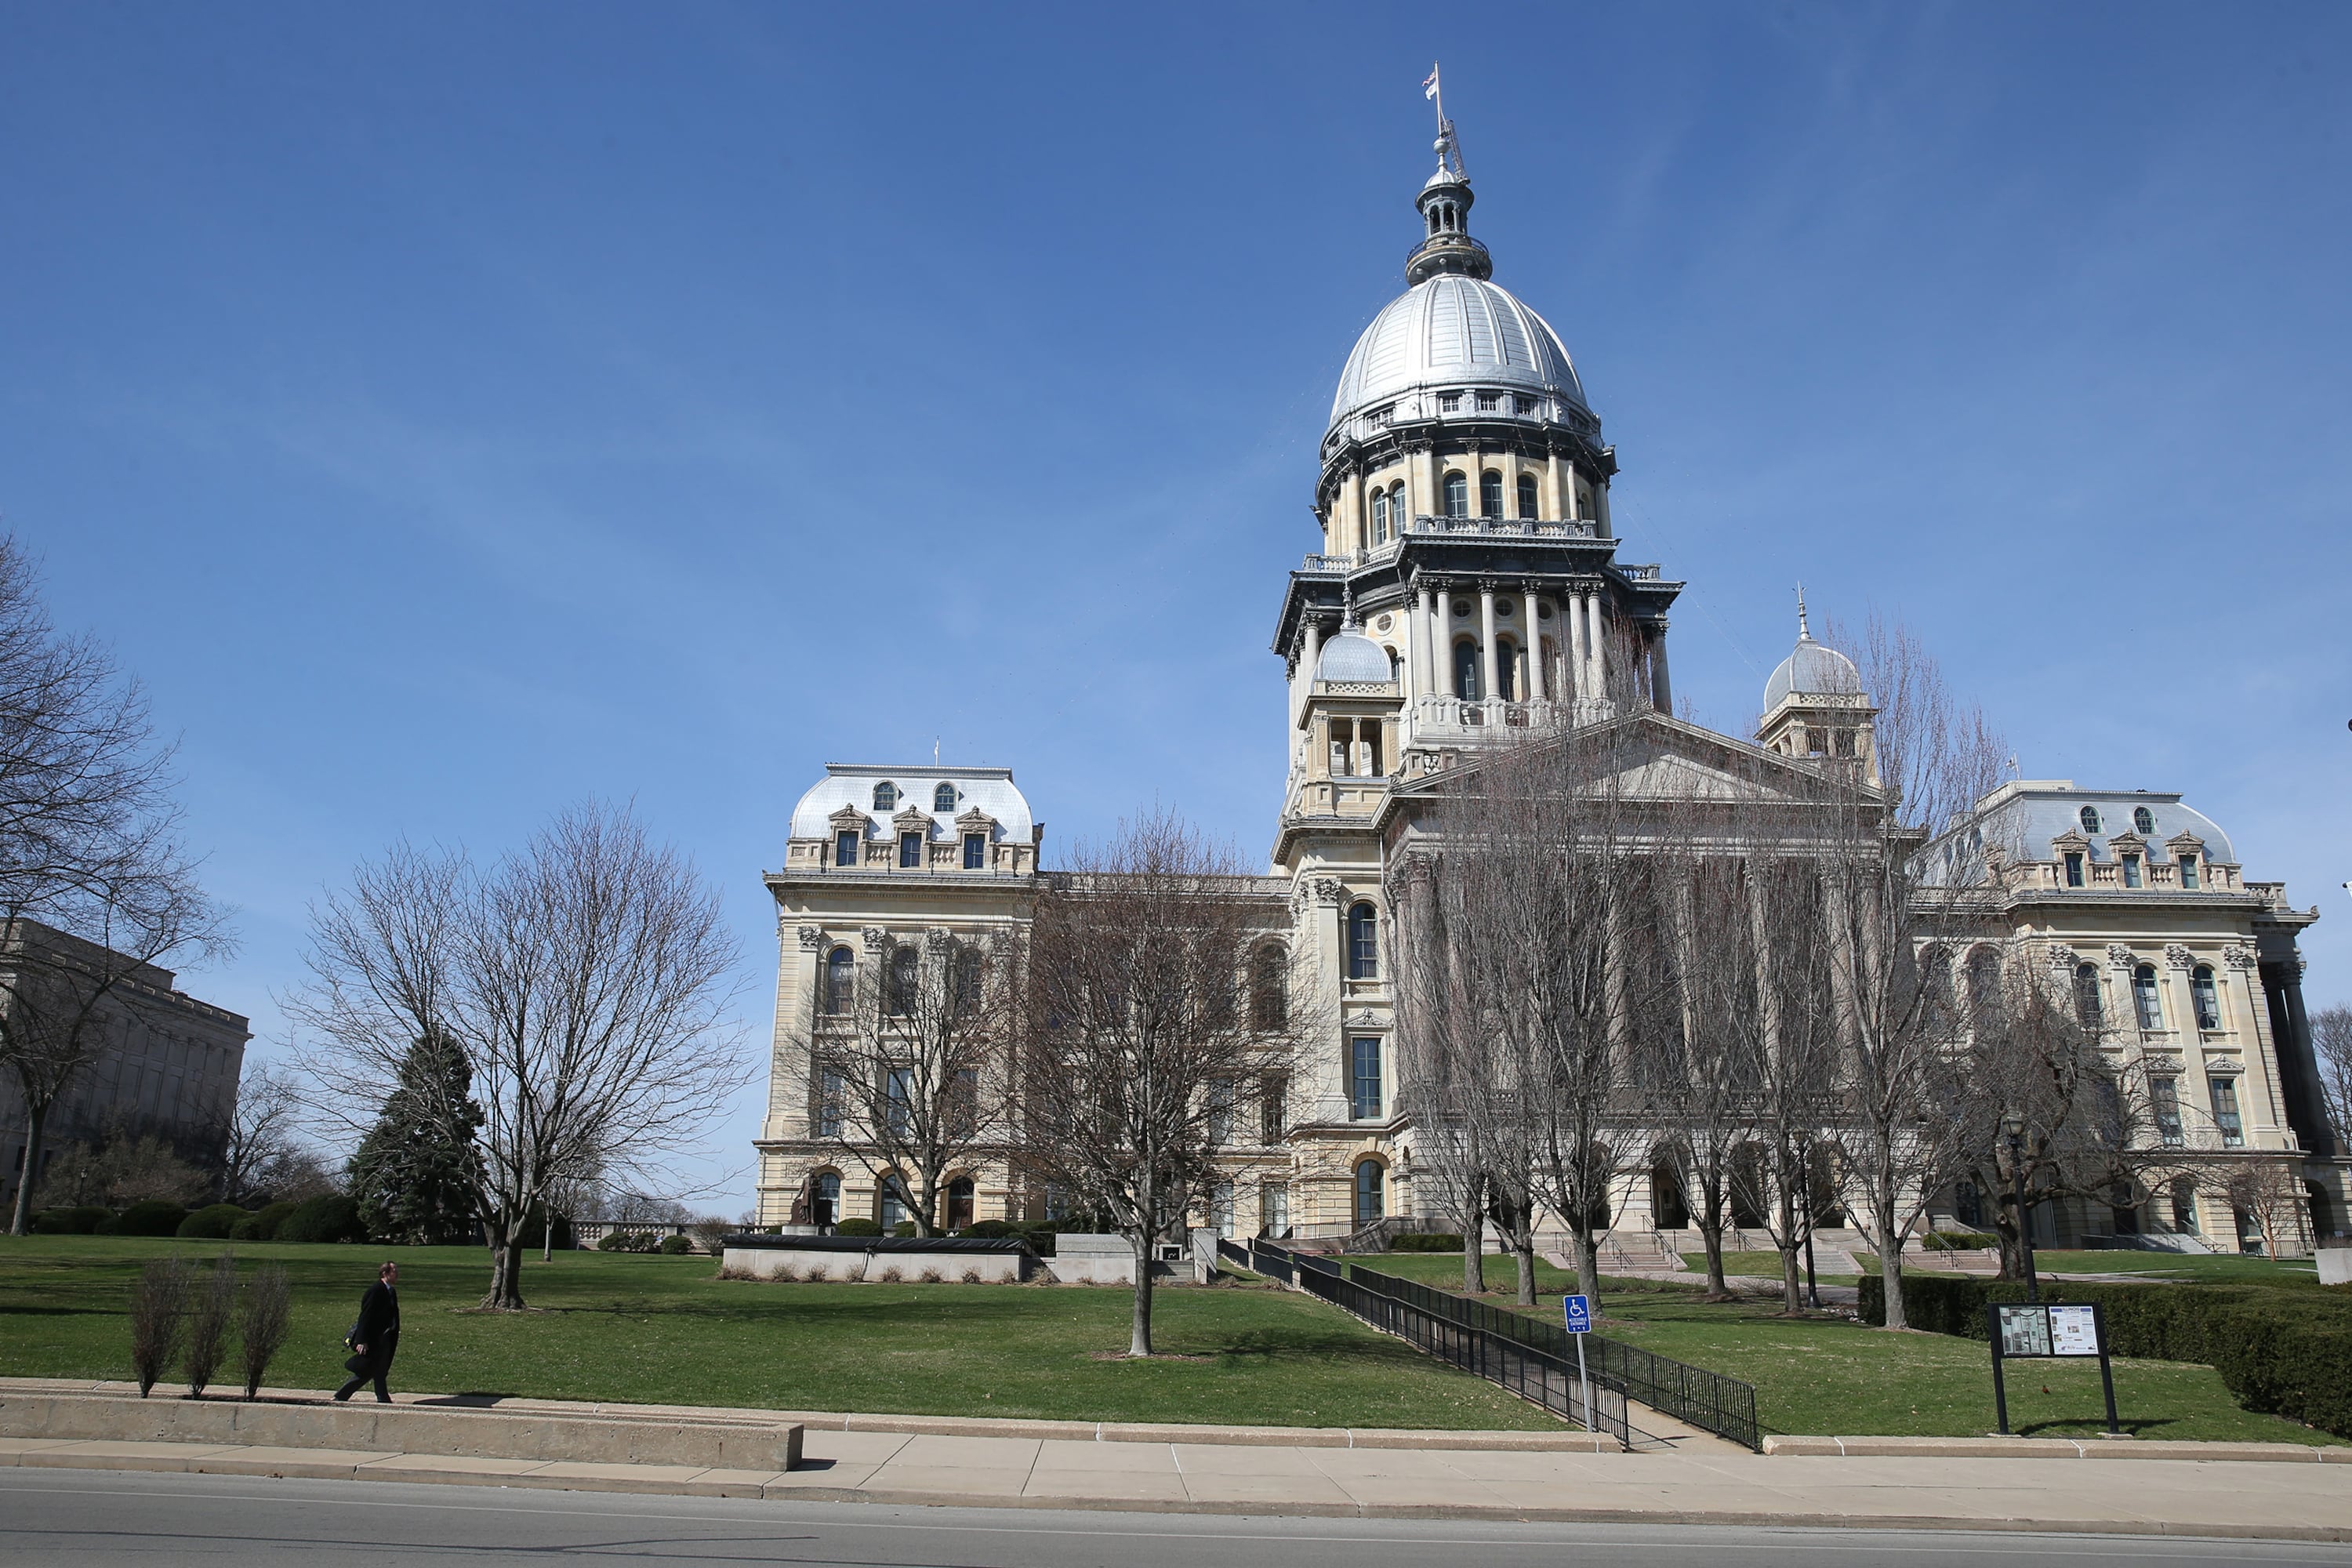 The Illinois State Capitol in Springfield, Ill.